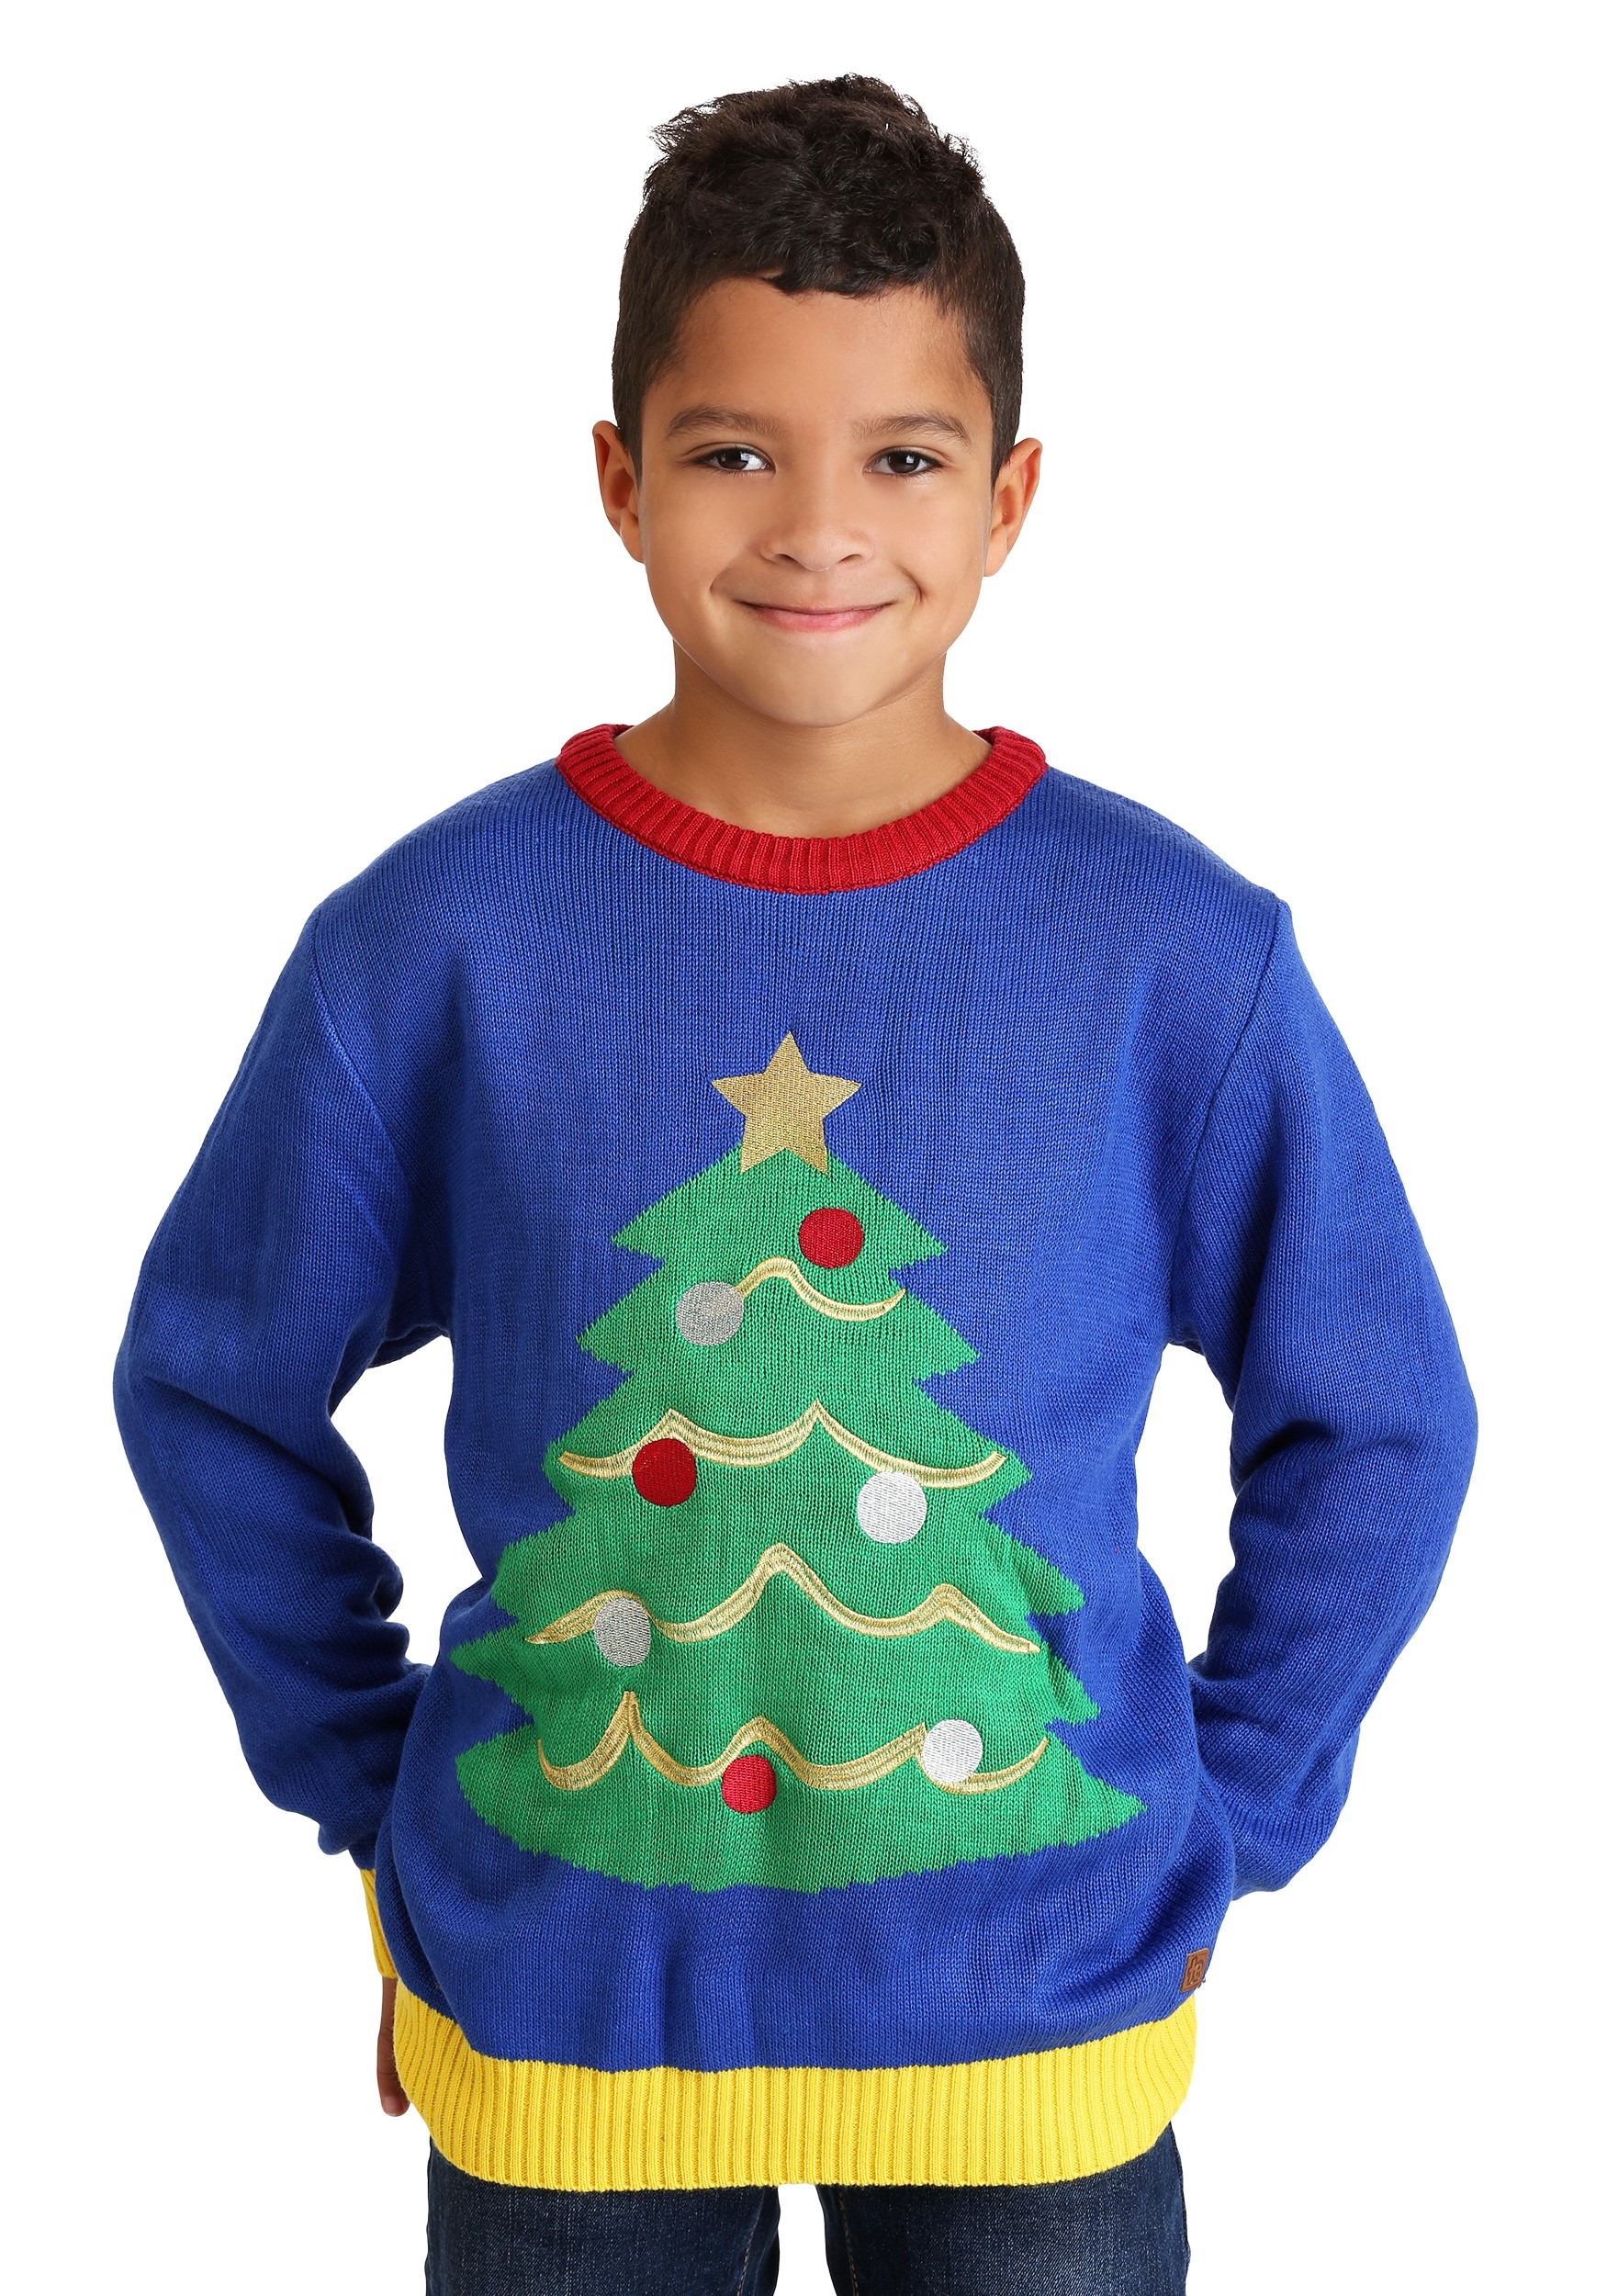 Tacky Boys and Girls Kid's Holiday Pullovers Tipsy Elves Ugly Christmas Sweaters for Children 